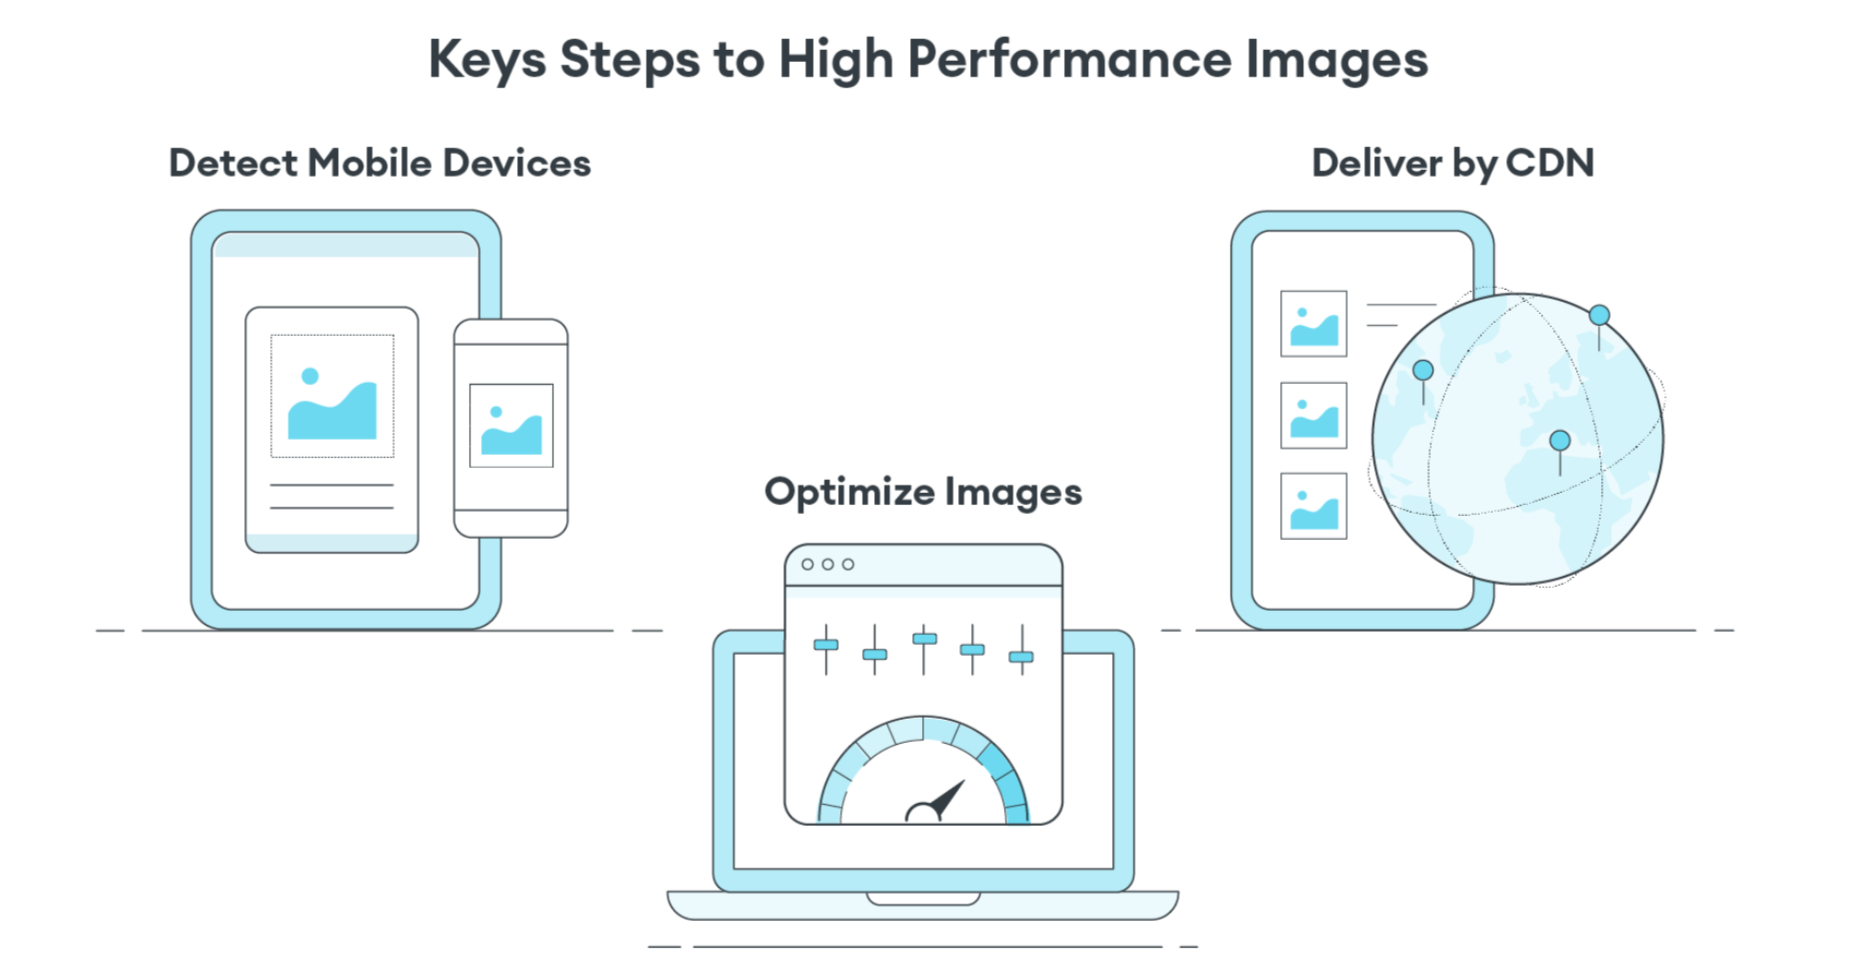 Key Steps to High Performance Images